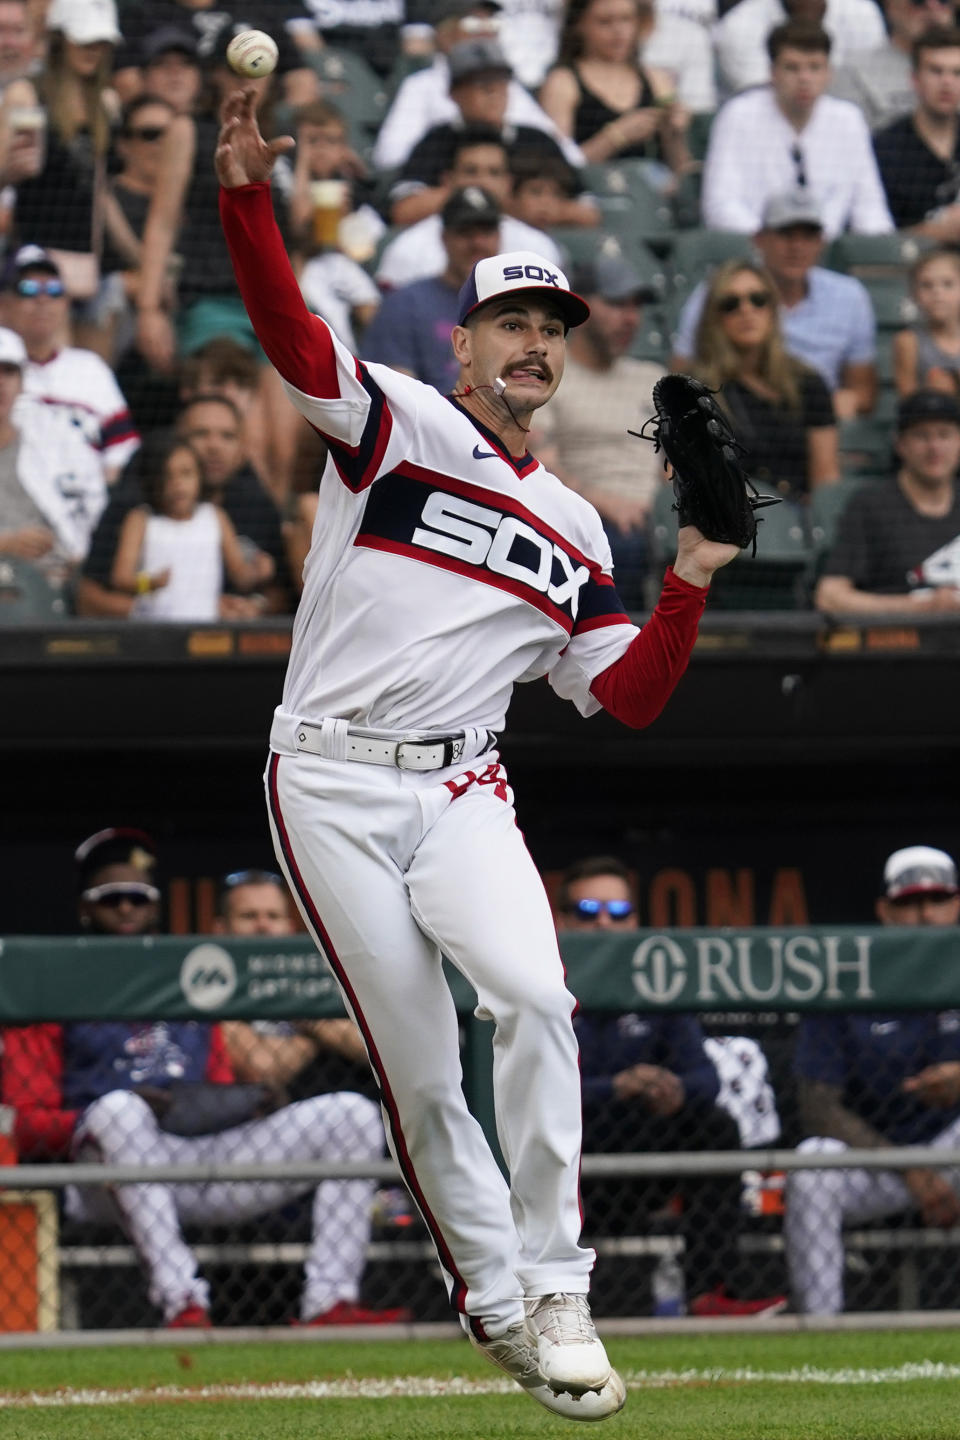 Chicago White Sox starting pitcher Dylan Cease throws to first base after Cleveland Guardians' Josh Naylor hit a single during the third inning of a baseball game in Chicago, Sunday, July 24, 2022. (AP Photo/Nam Y. Huh)